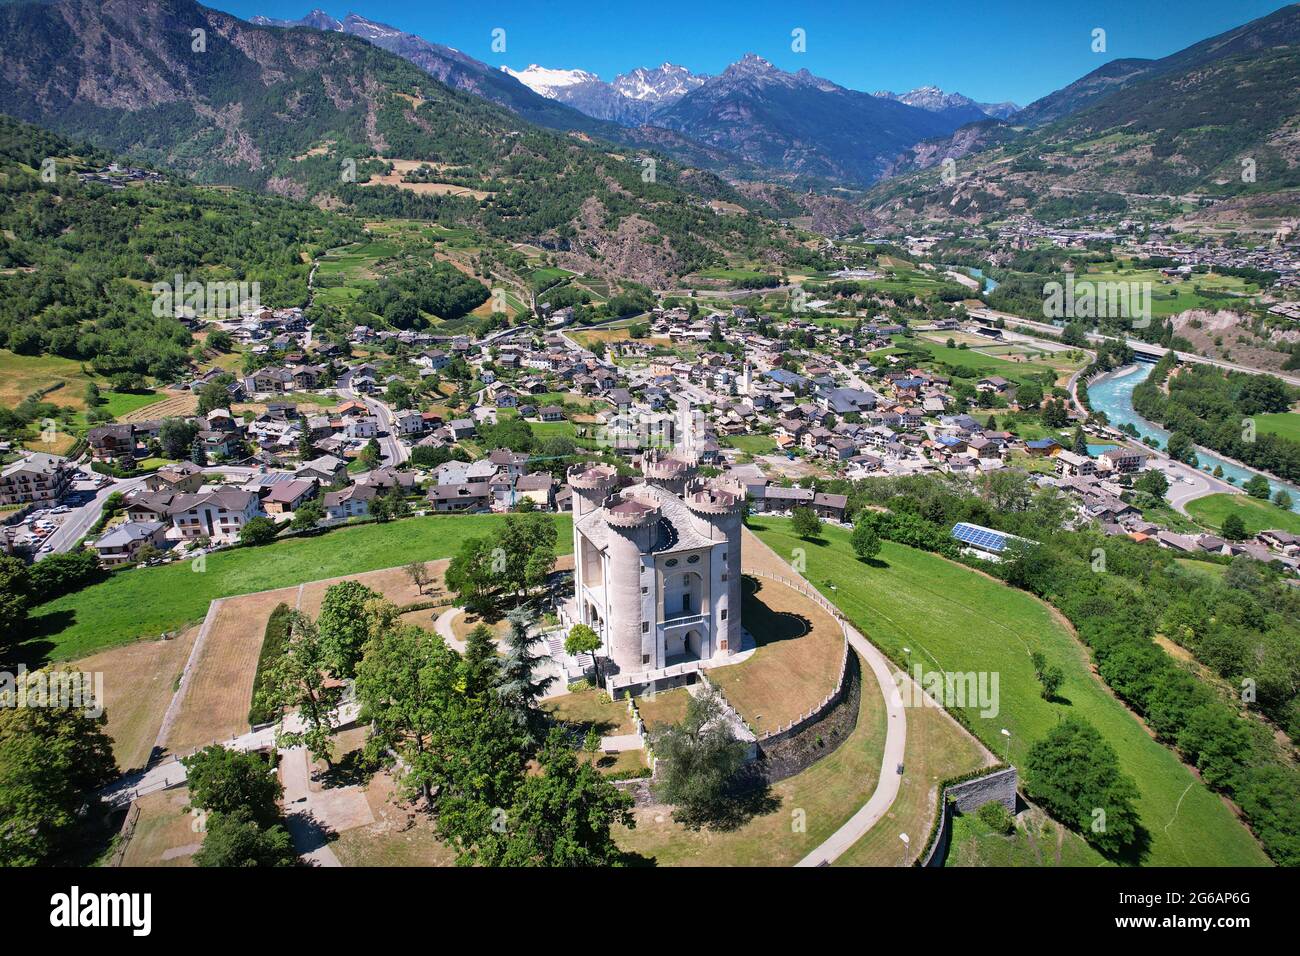 Aerial view of the medioeval castle, Aymavilles Aosta Valley Italy Stock Photo